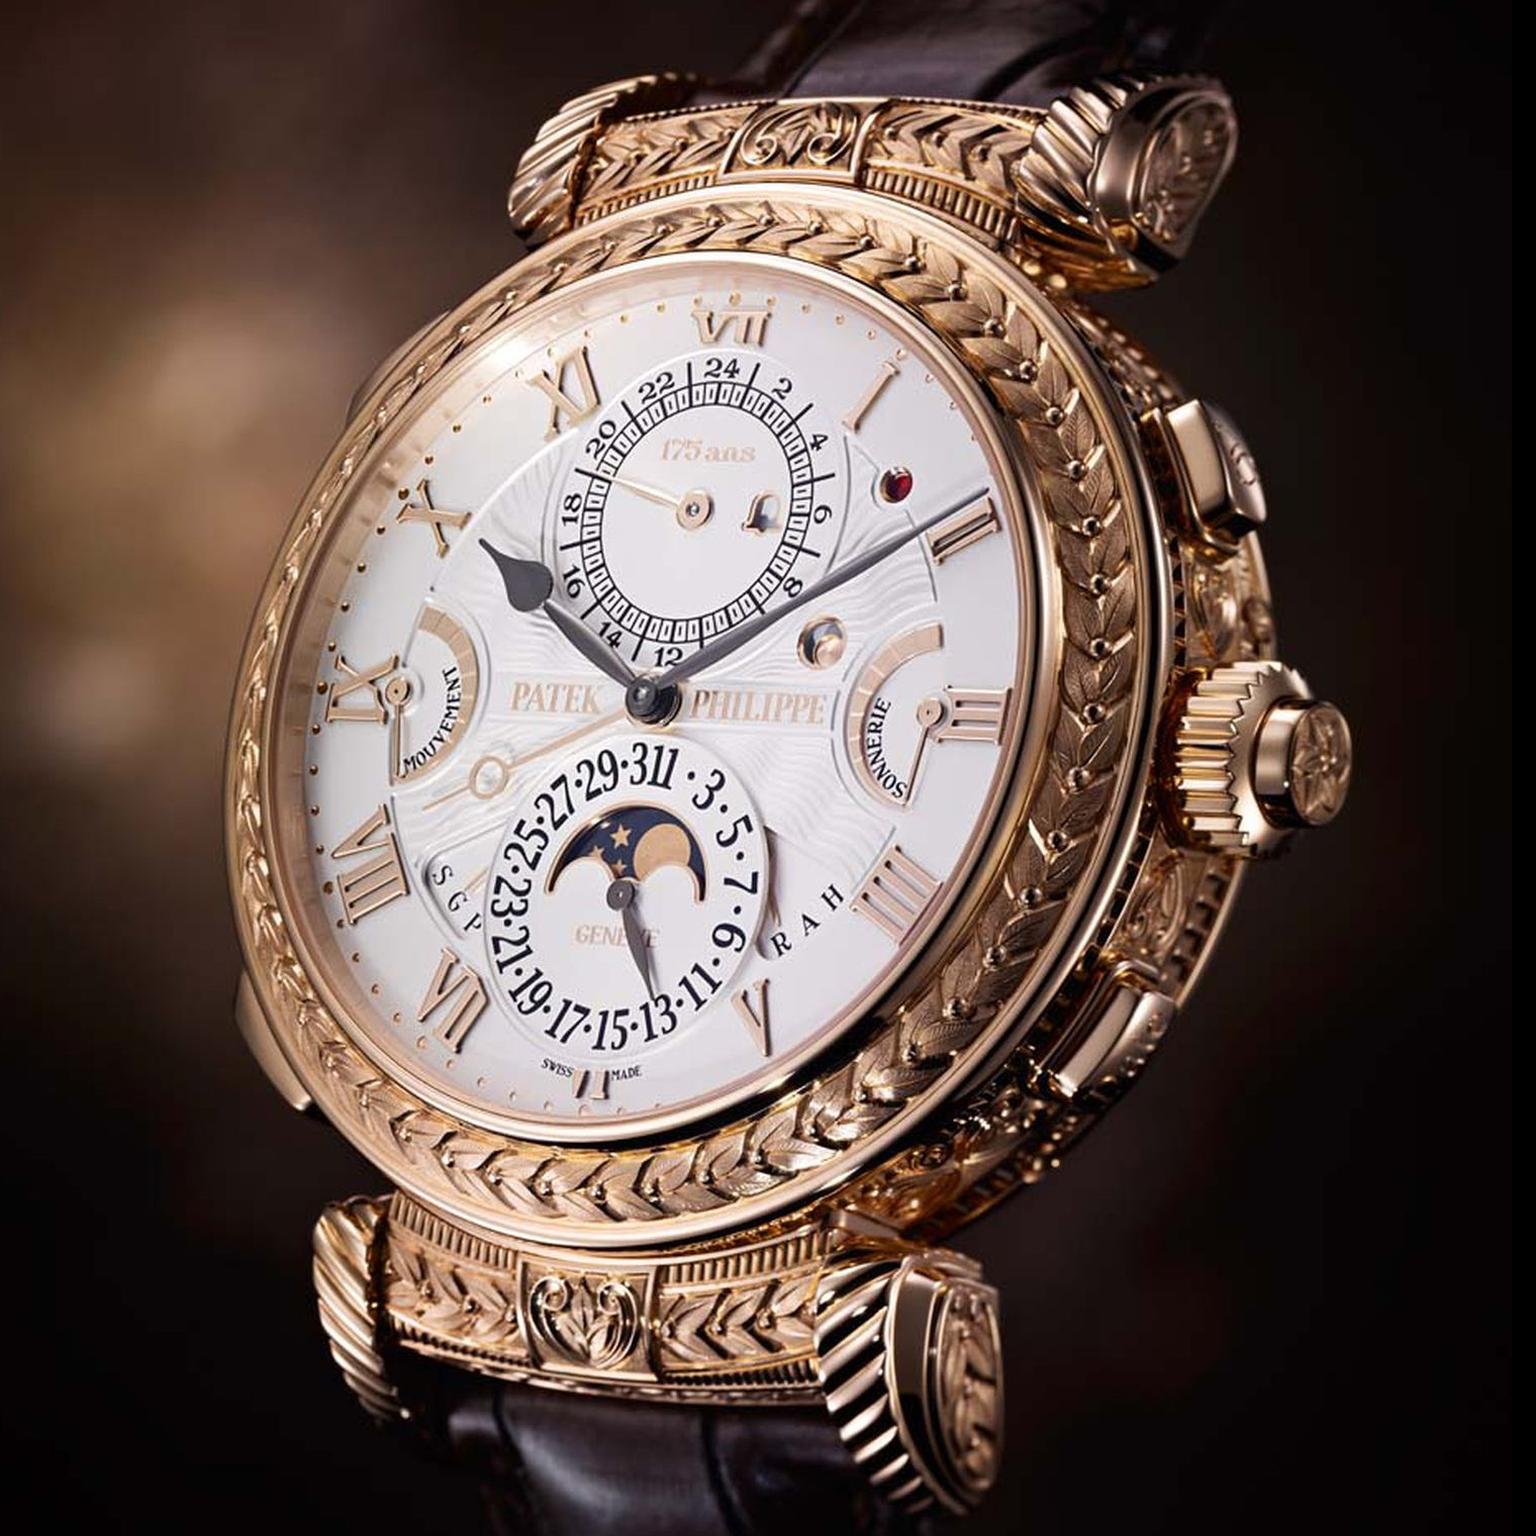 Worlds Most Expensive Watch Auctioned For 31 Million Dollars